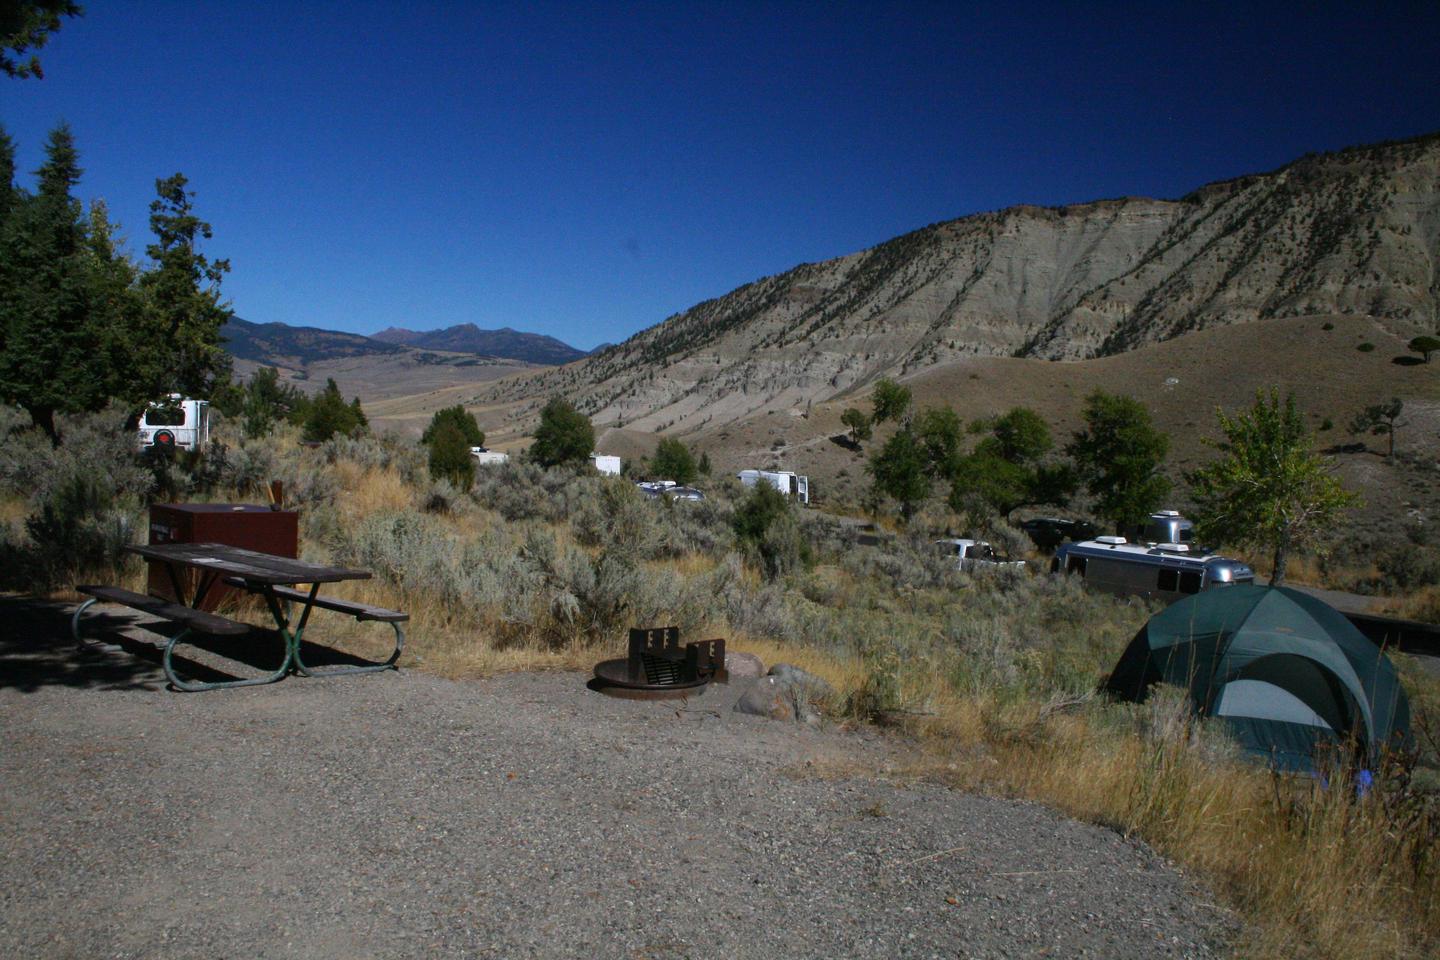 Mammoth Hot Springs Campground Site 61Mammoth Hot Springs Campground Site 61, facing north